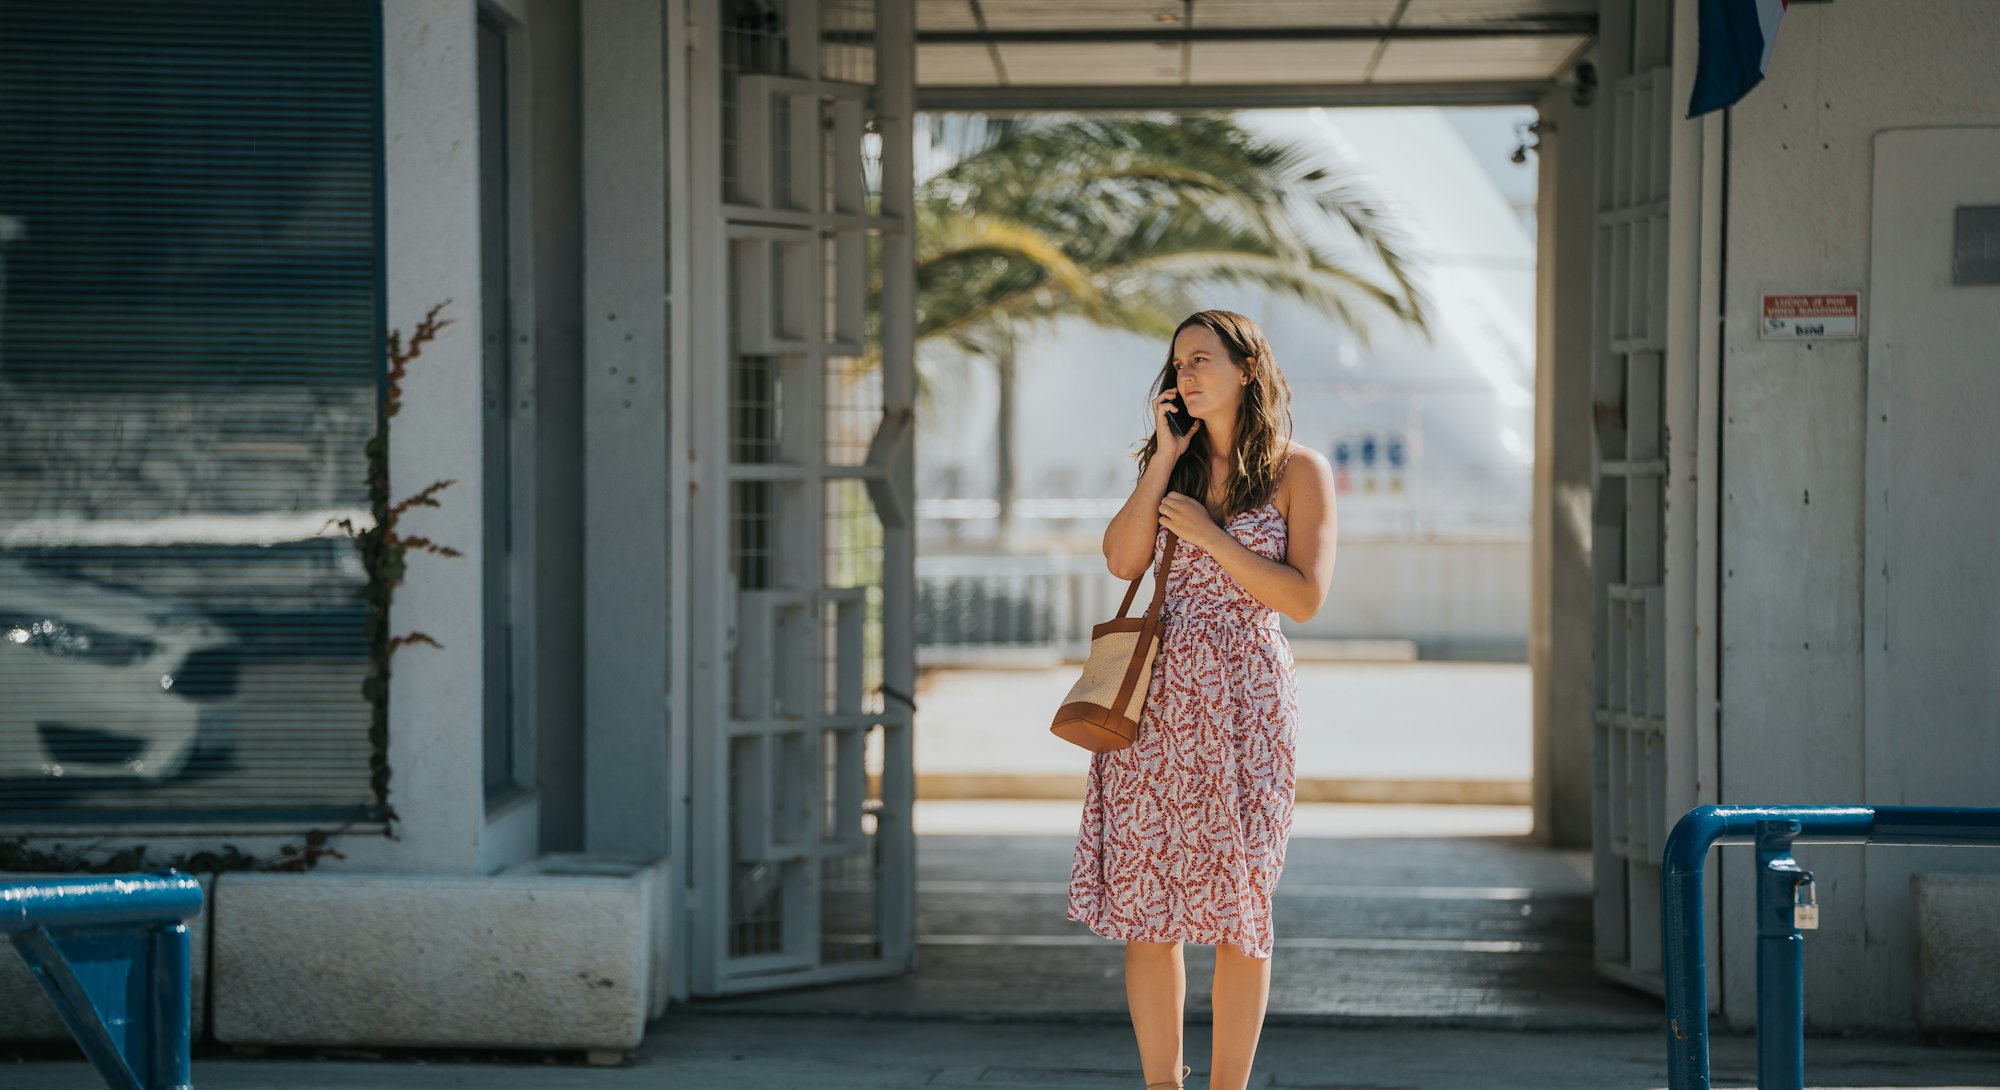 Leighton Meester as Beth in 'The Weekend Away' (2022). Photo courtesy of Netflix.